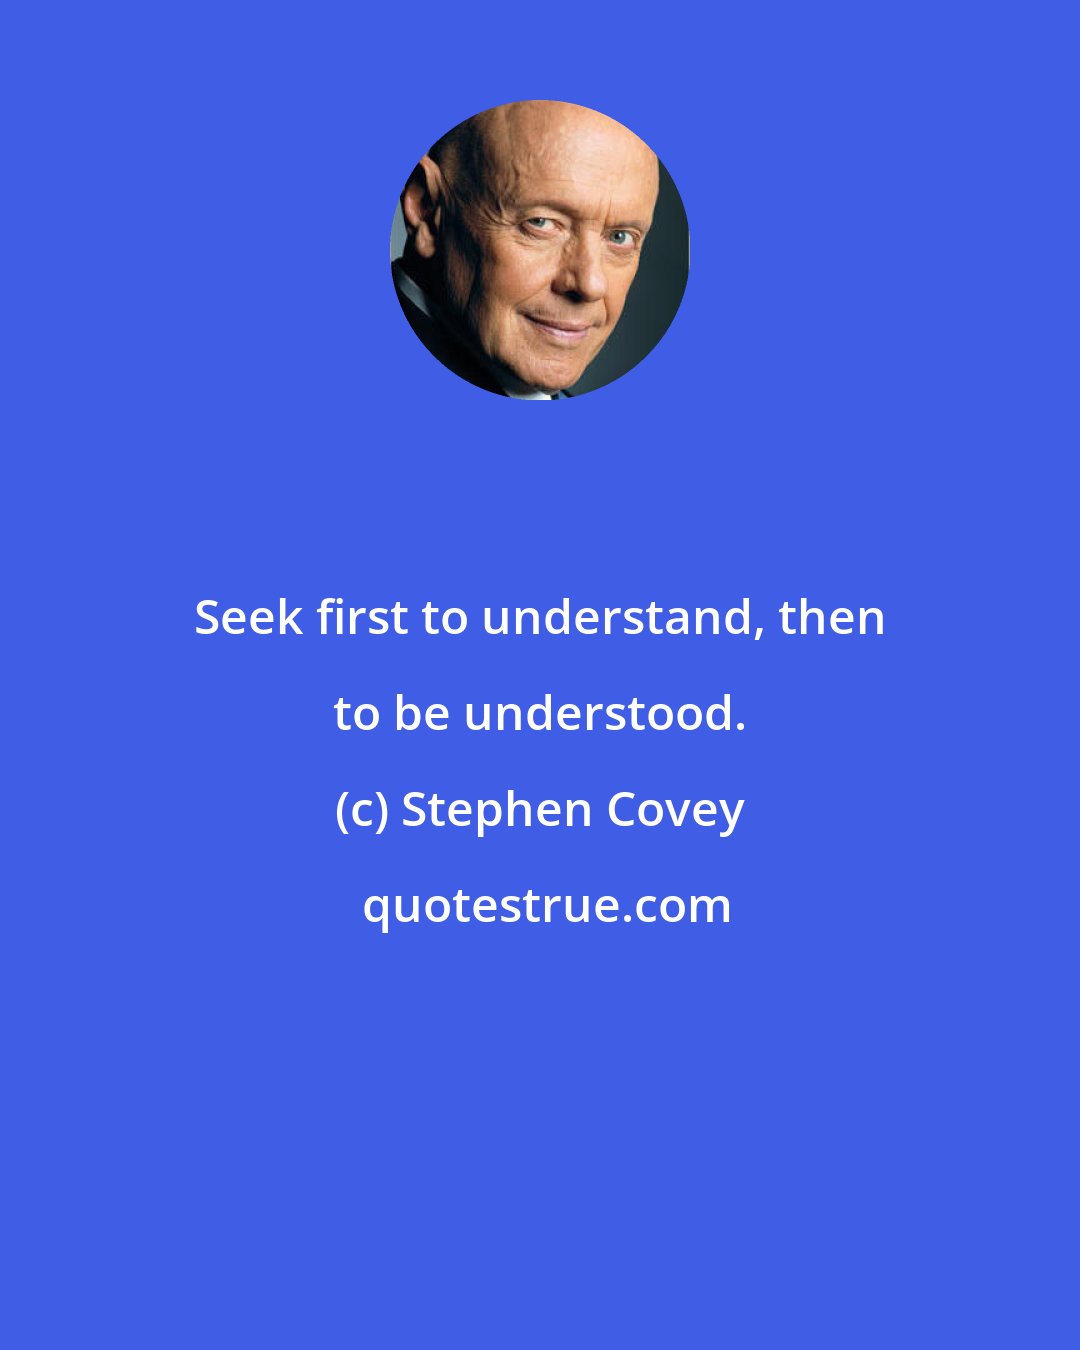 Stephen Covey: Seek first to understand, then to be understood.